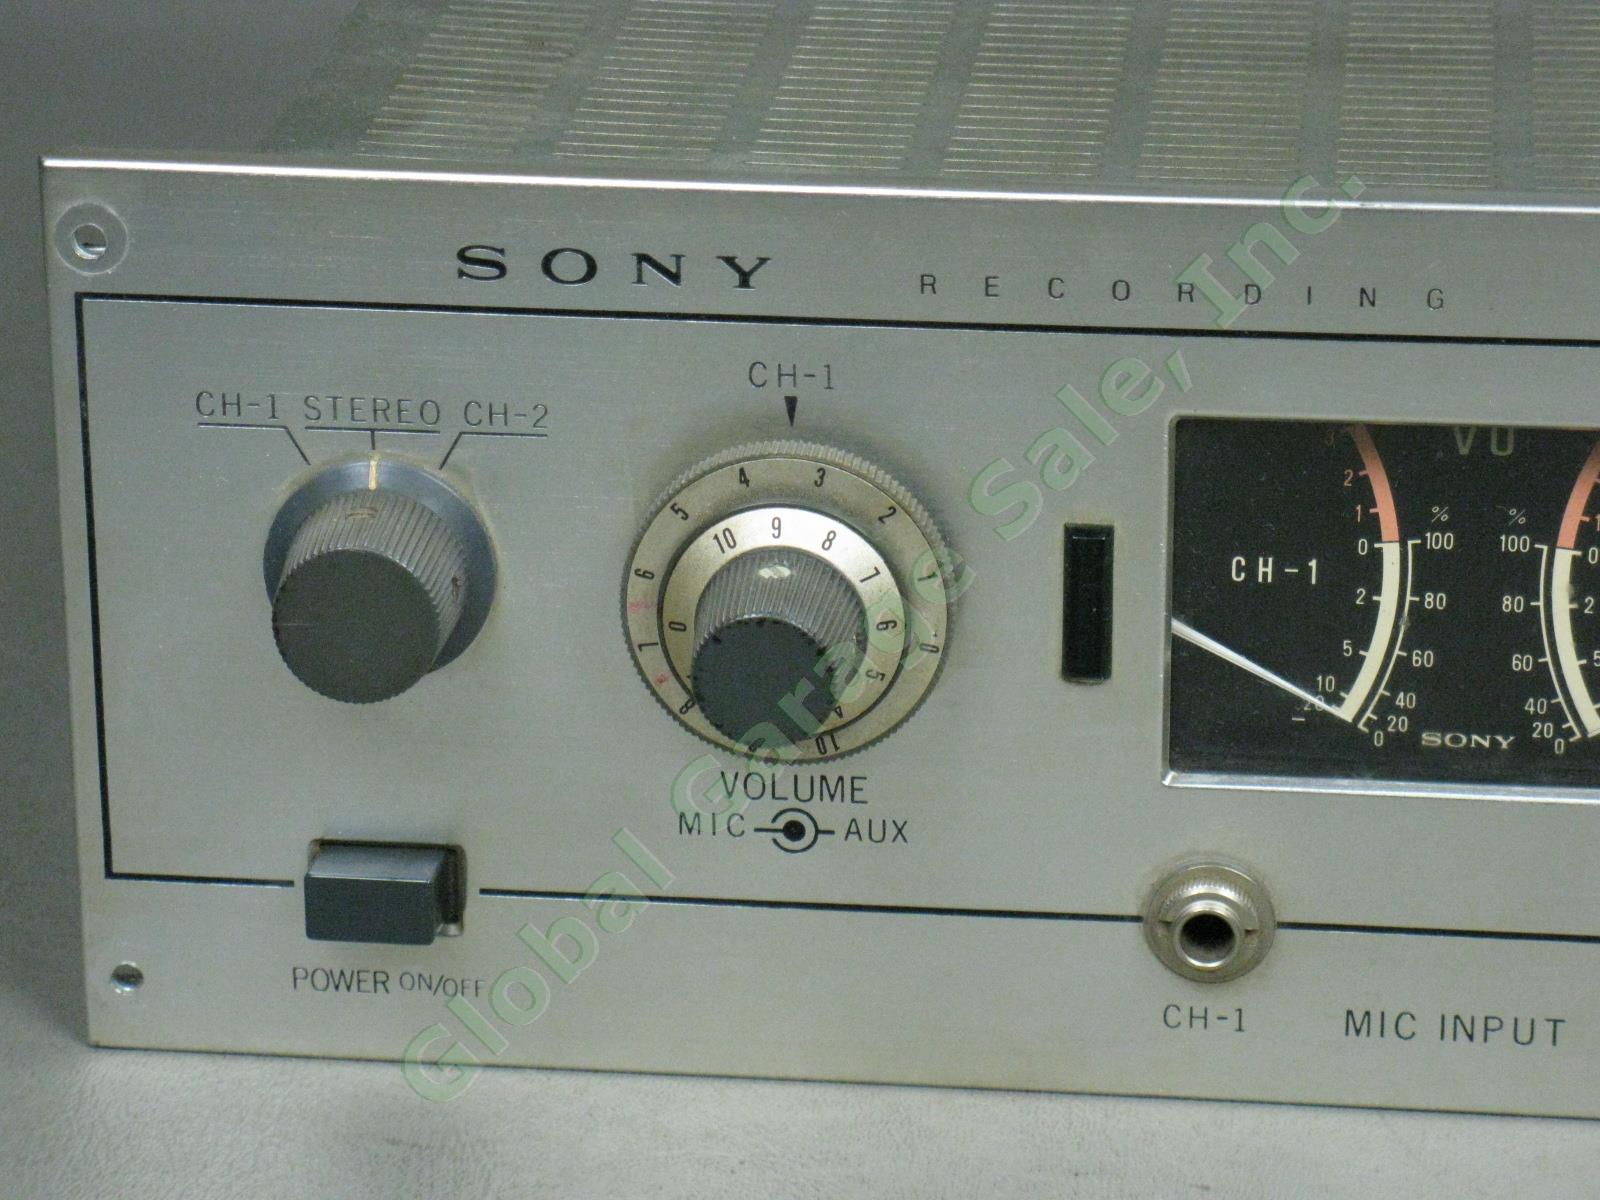 Vintage Sony SRA-3 Tube Amplifier Stereophonic Recording Amp No Reserve Price! 2